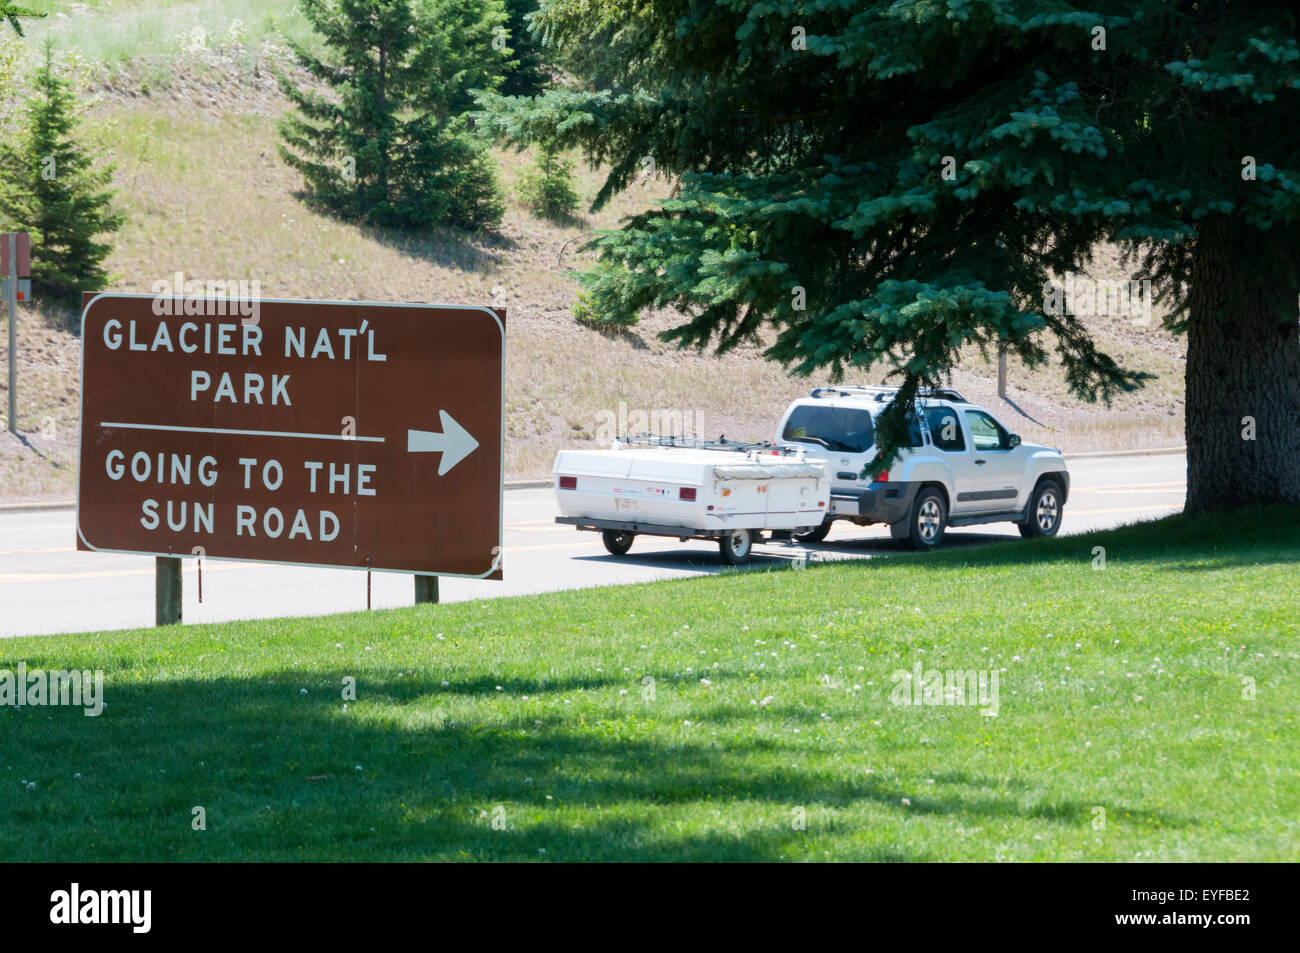 A sign for Going to the Sun Road in Glacier National Park, Montana, USA with a car towing a camping trailer (motion blurred). Stock Photo